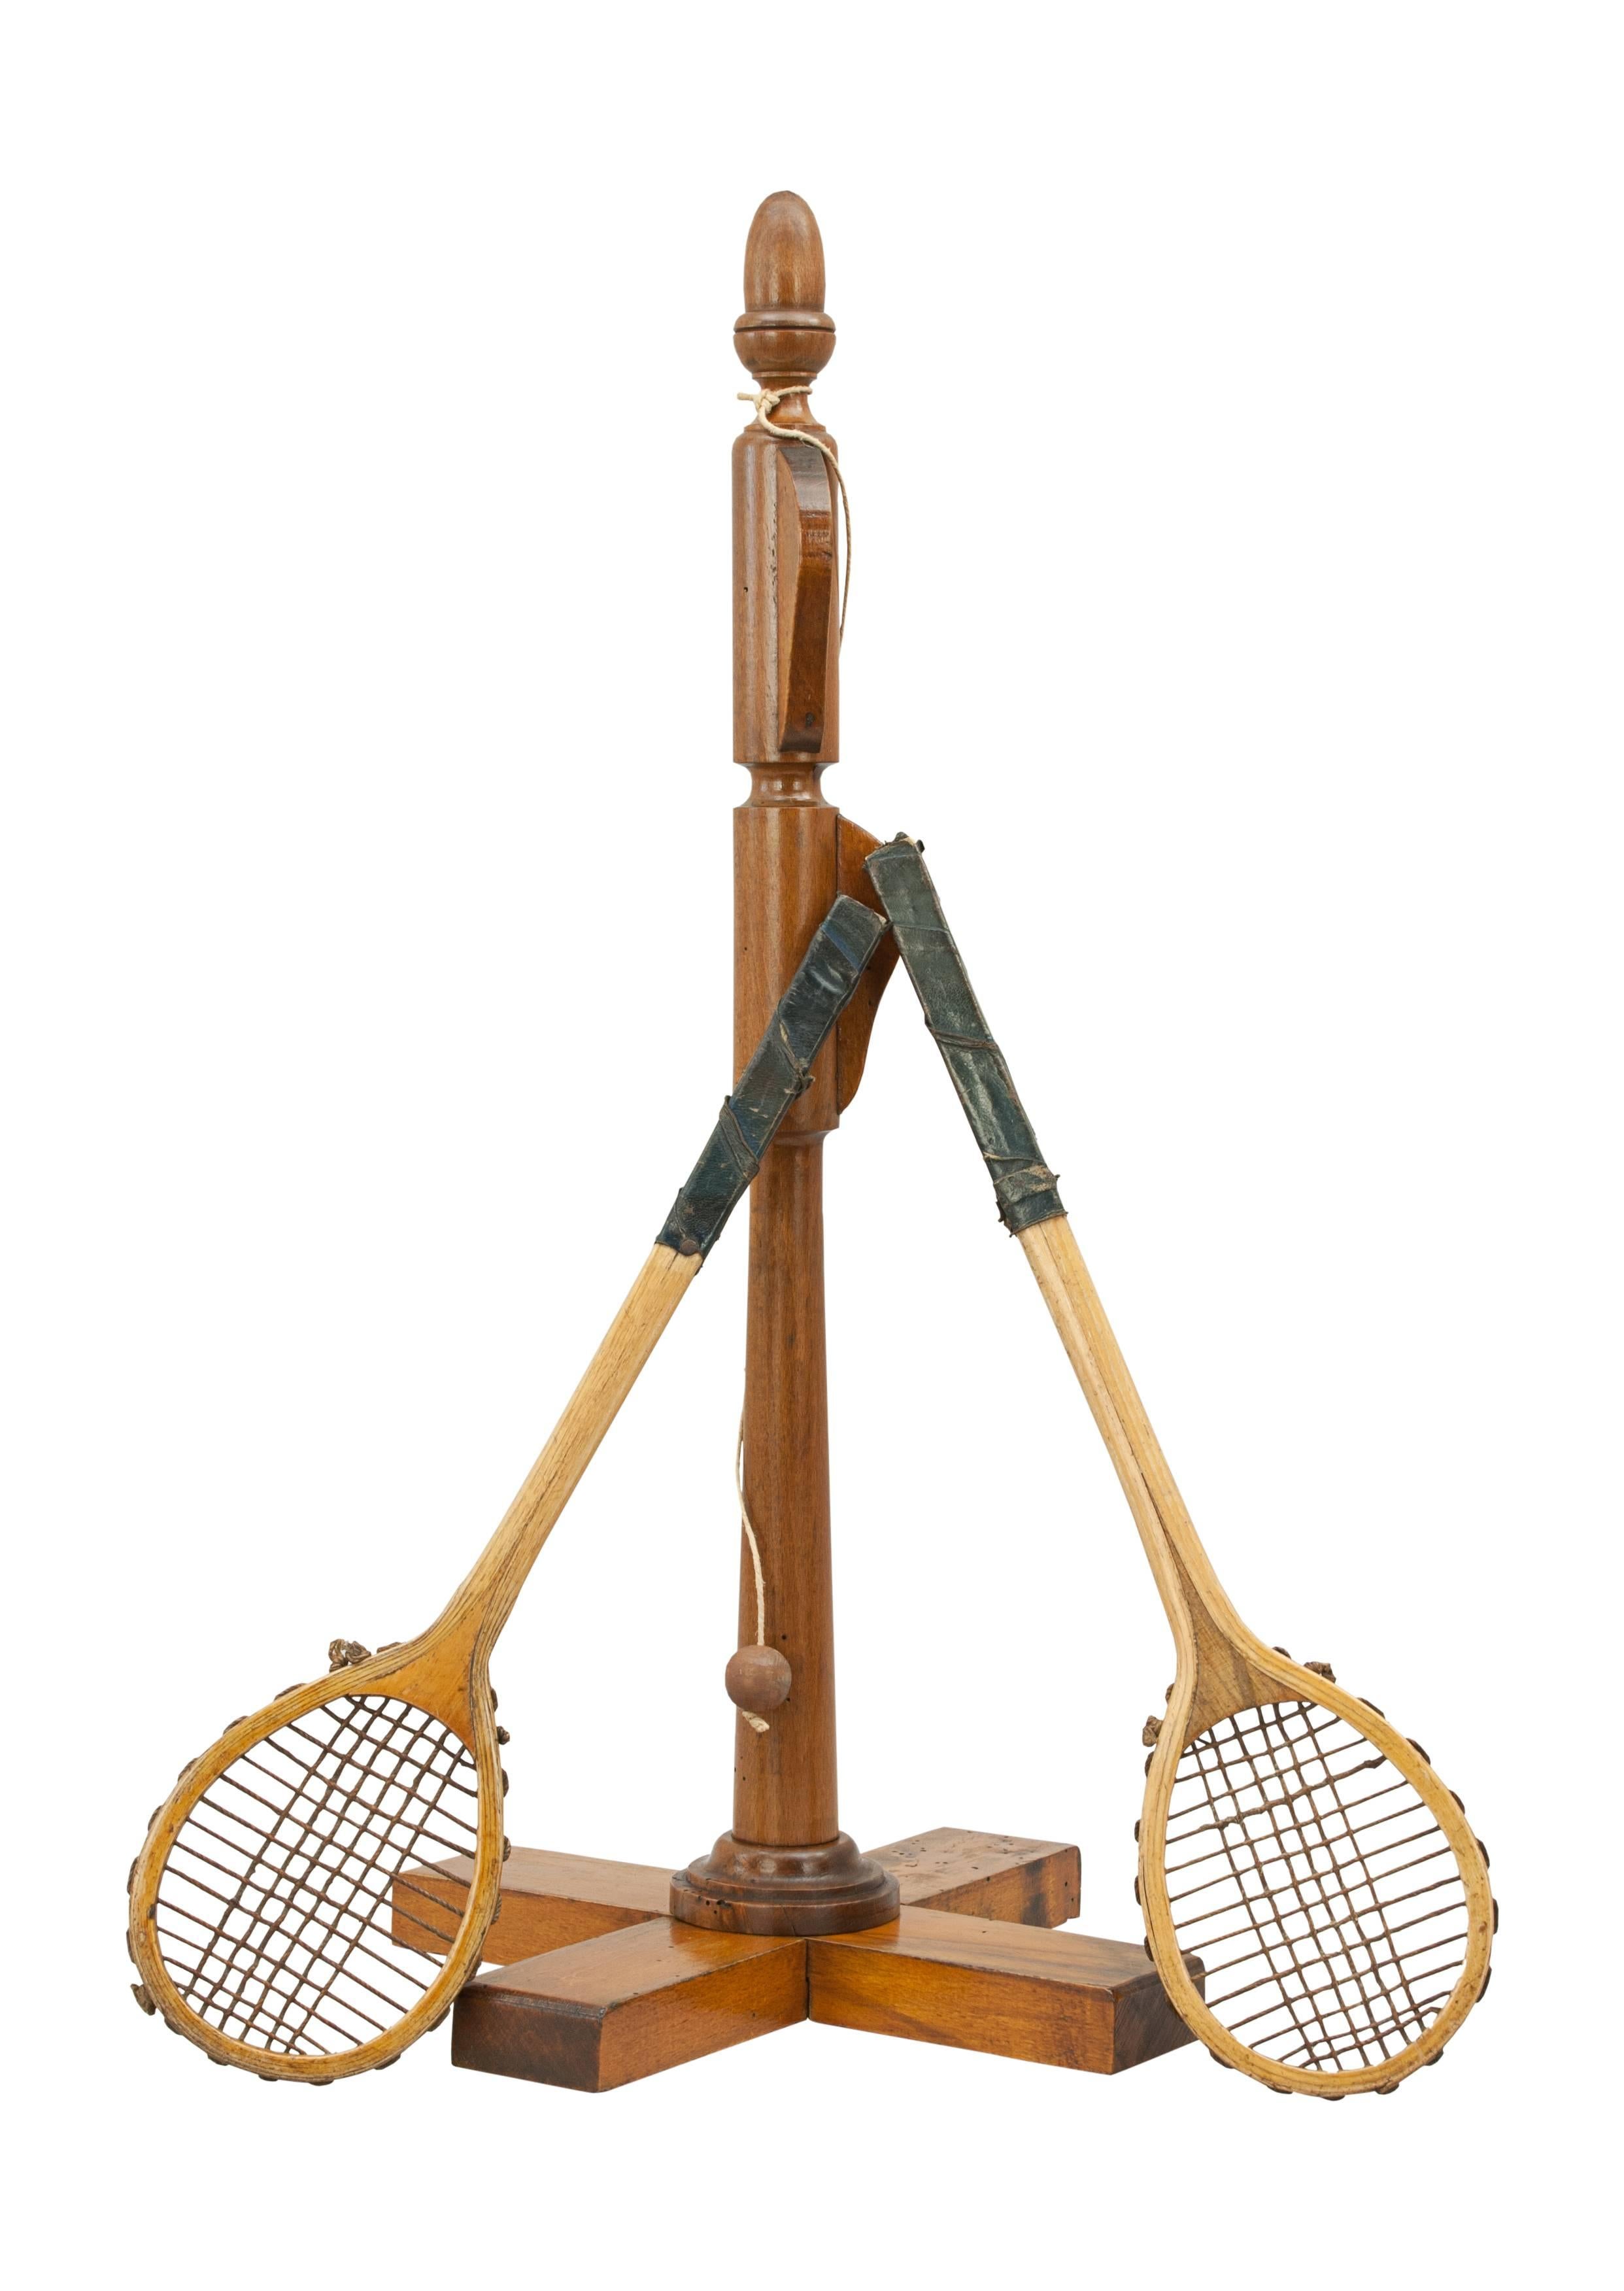 Vintage tabletop swing ball game.
A rare tabletop swing ball game in original pine box. The exterior of the lid with stenciled name 'Le Spiroble de Salon'. The interior with paper instructions. The Victorian or early Edwardian game comprises of a